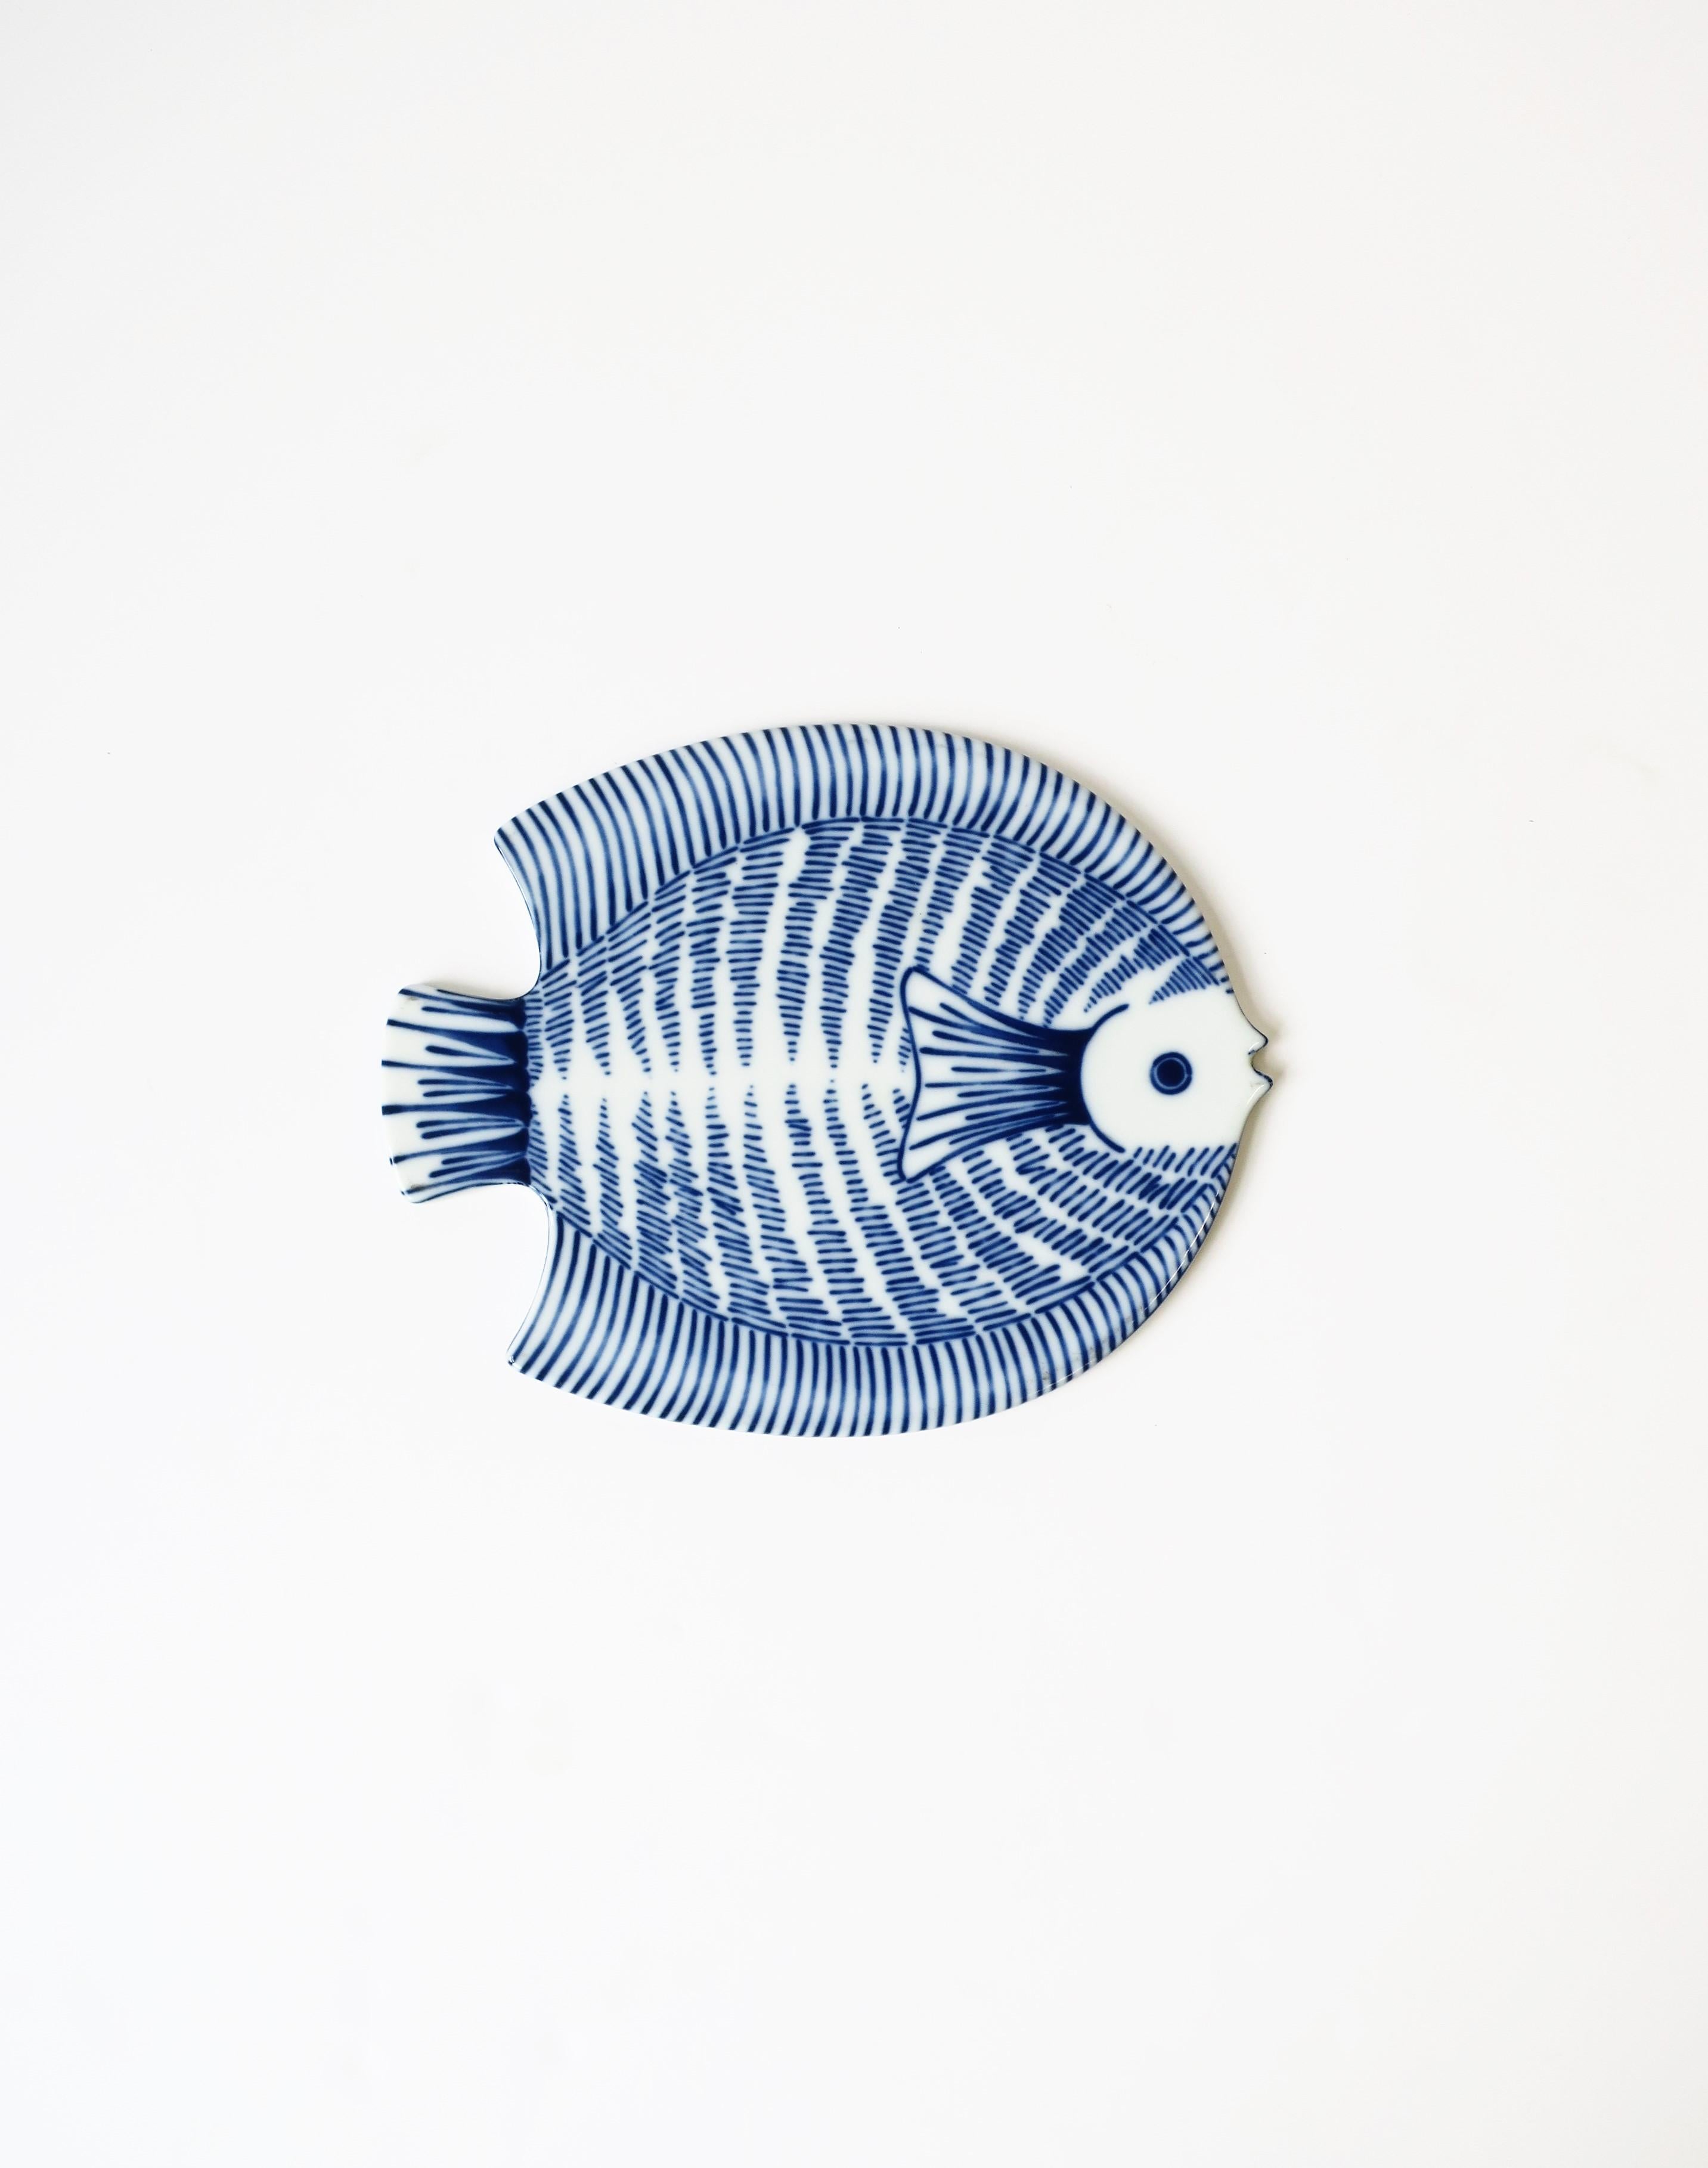 Vintage Blue and White Ceramic Fish Trivet or Wall Art 3